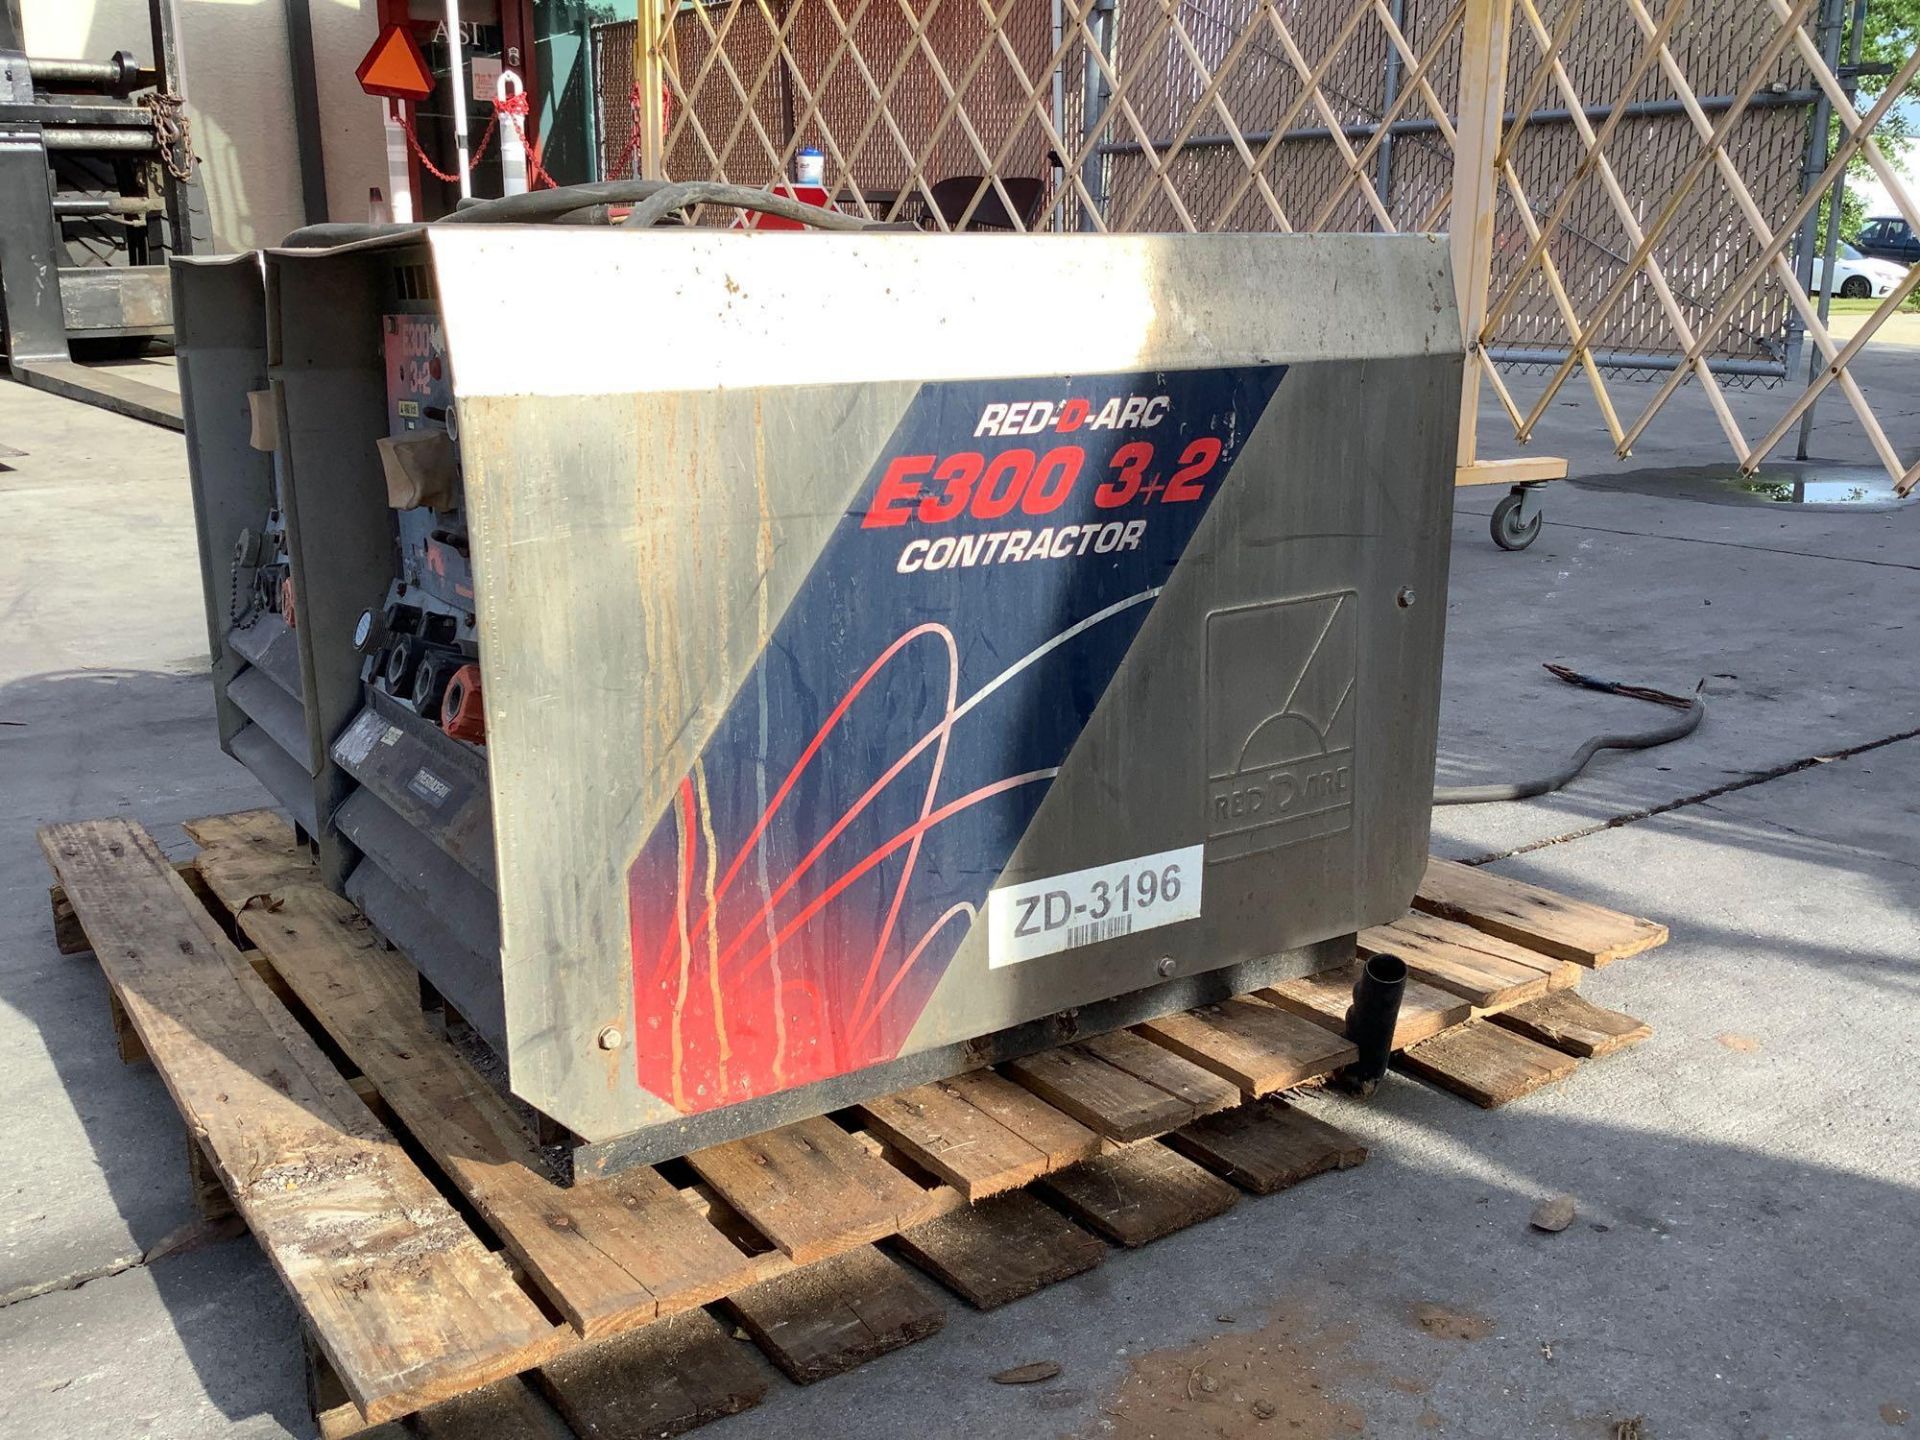 2 ELECTRIC RED-D-ARC E300 3+2 CONTRACTOR WELDERS/ THERMOFANS ,APPROX 480 VOLTS - Image 3 of 7